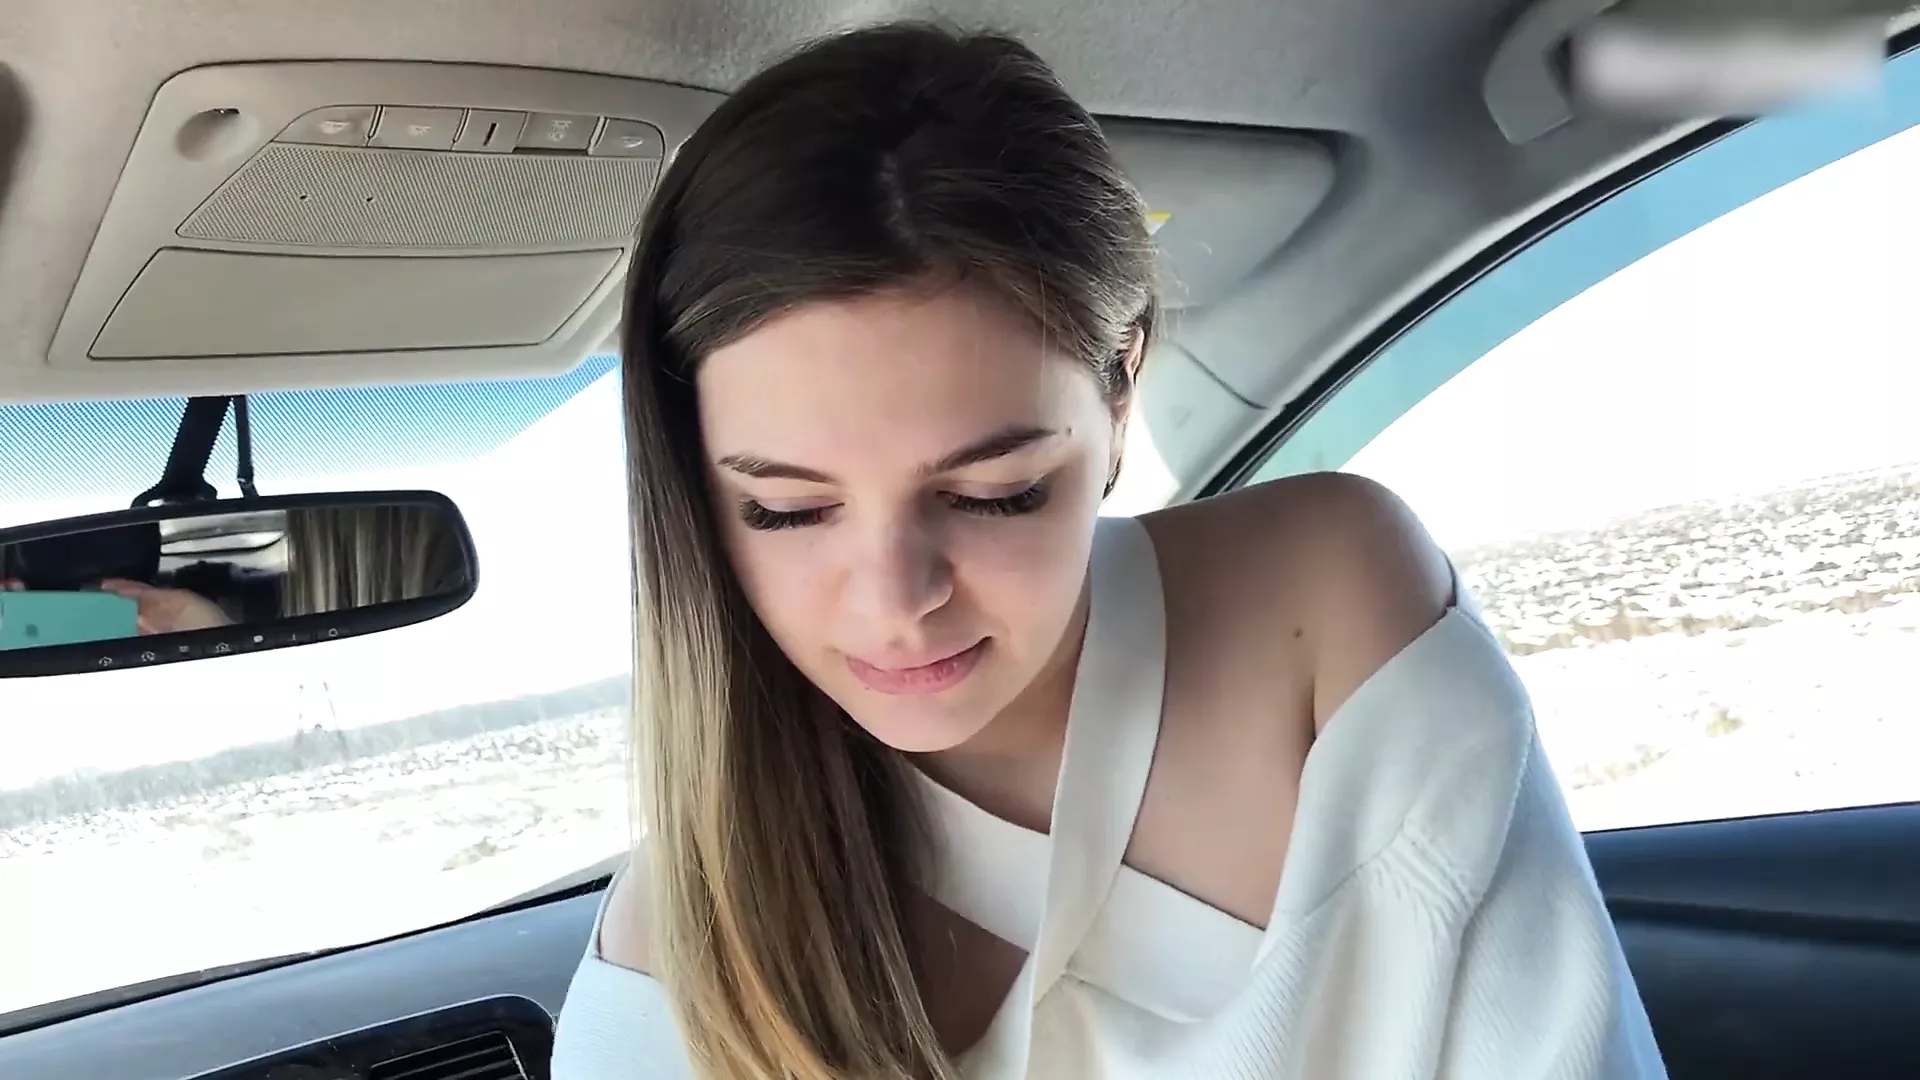 Fucking A Stranger Porn - Fucked a Stranger Girl in the Middle of a Field in a Car | xHamster